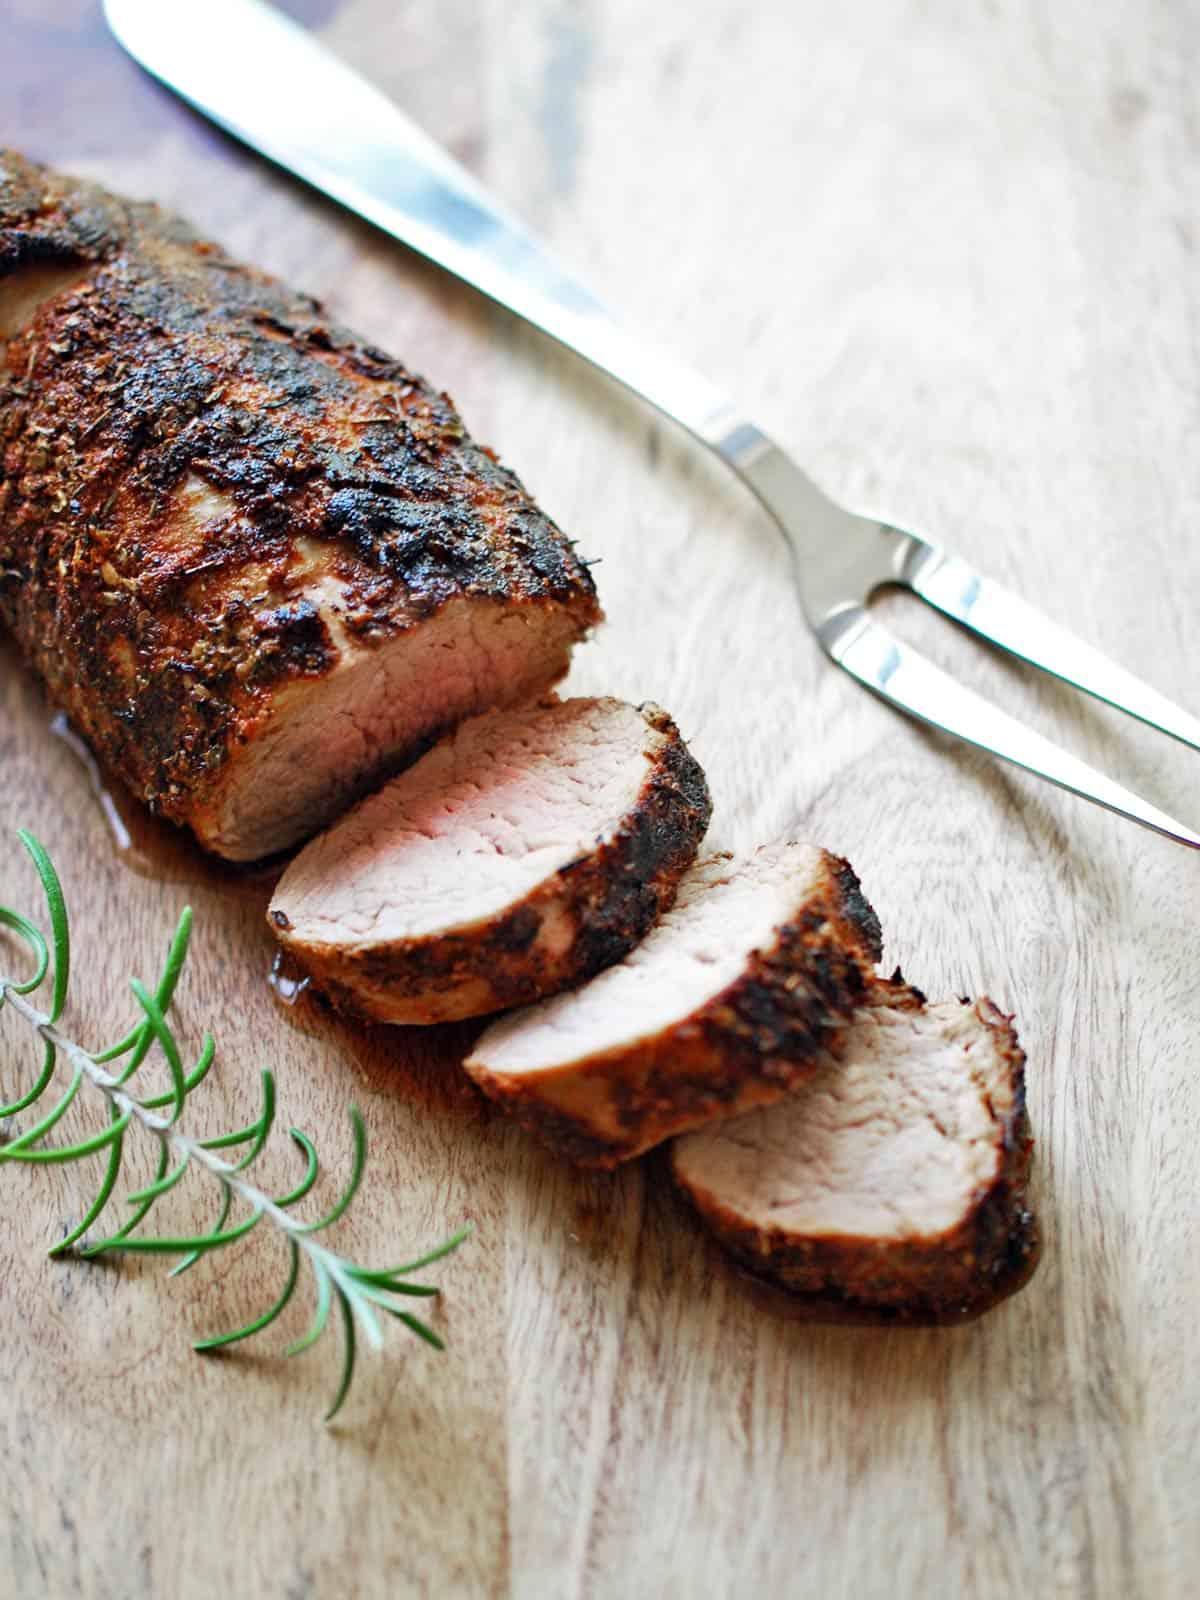 To detect Claire Newness Roasted Pork Tenderloin - Healthy Recipes Blog